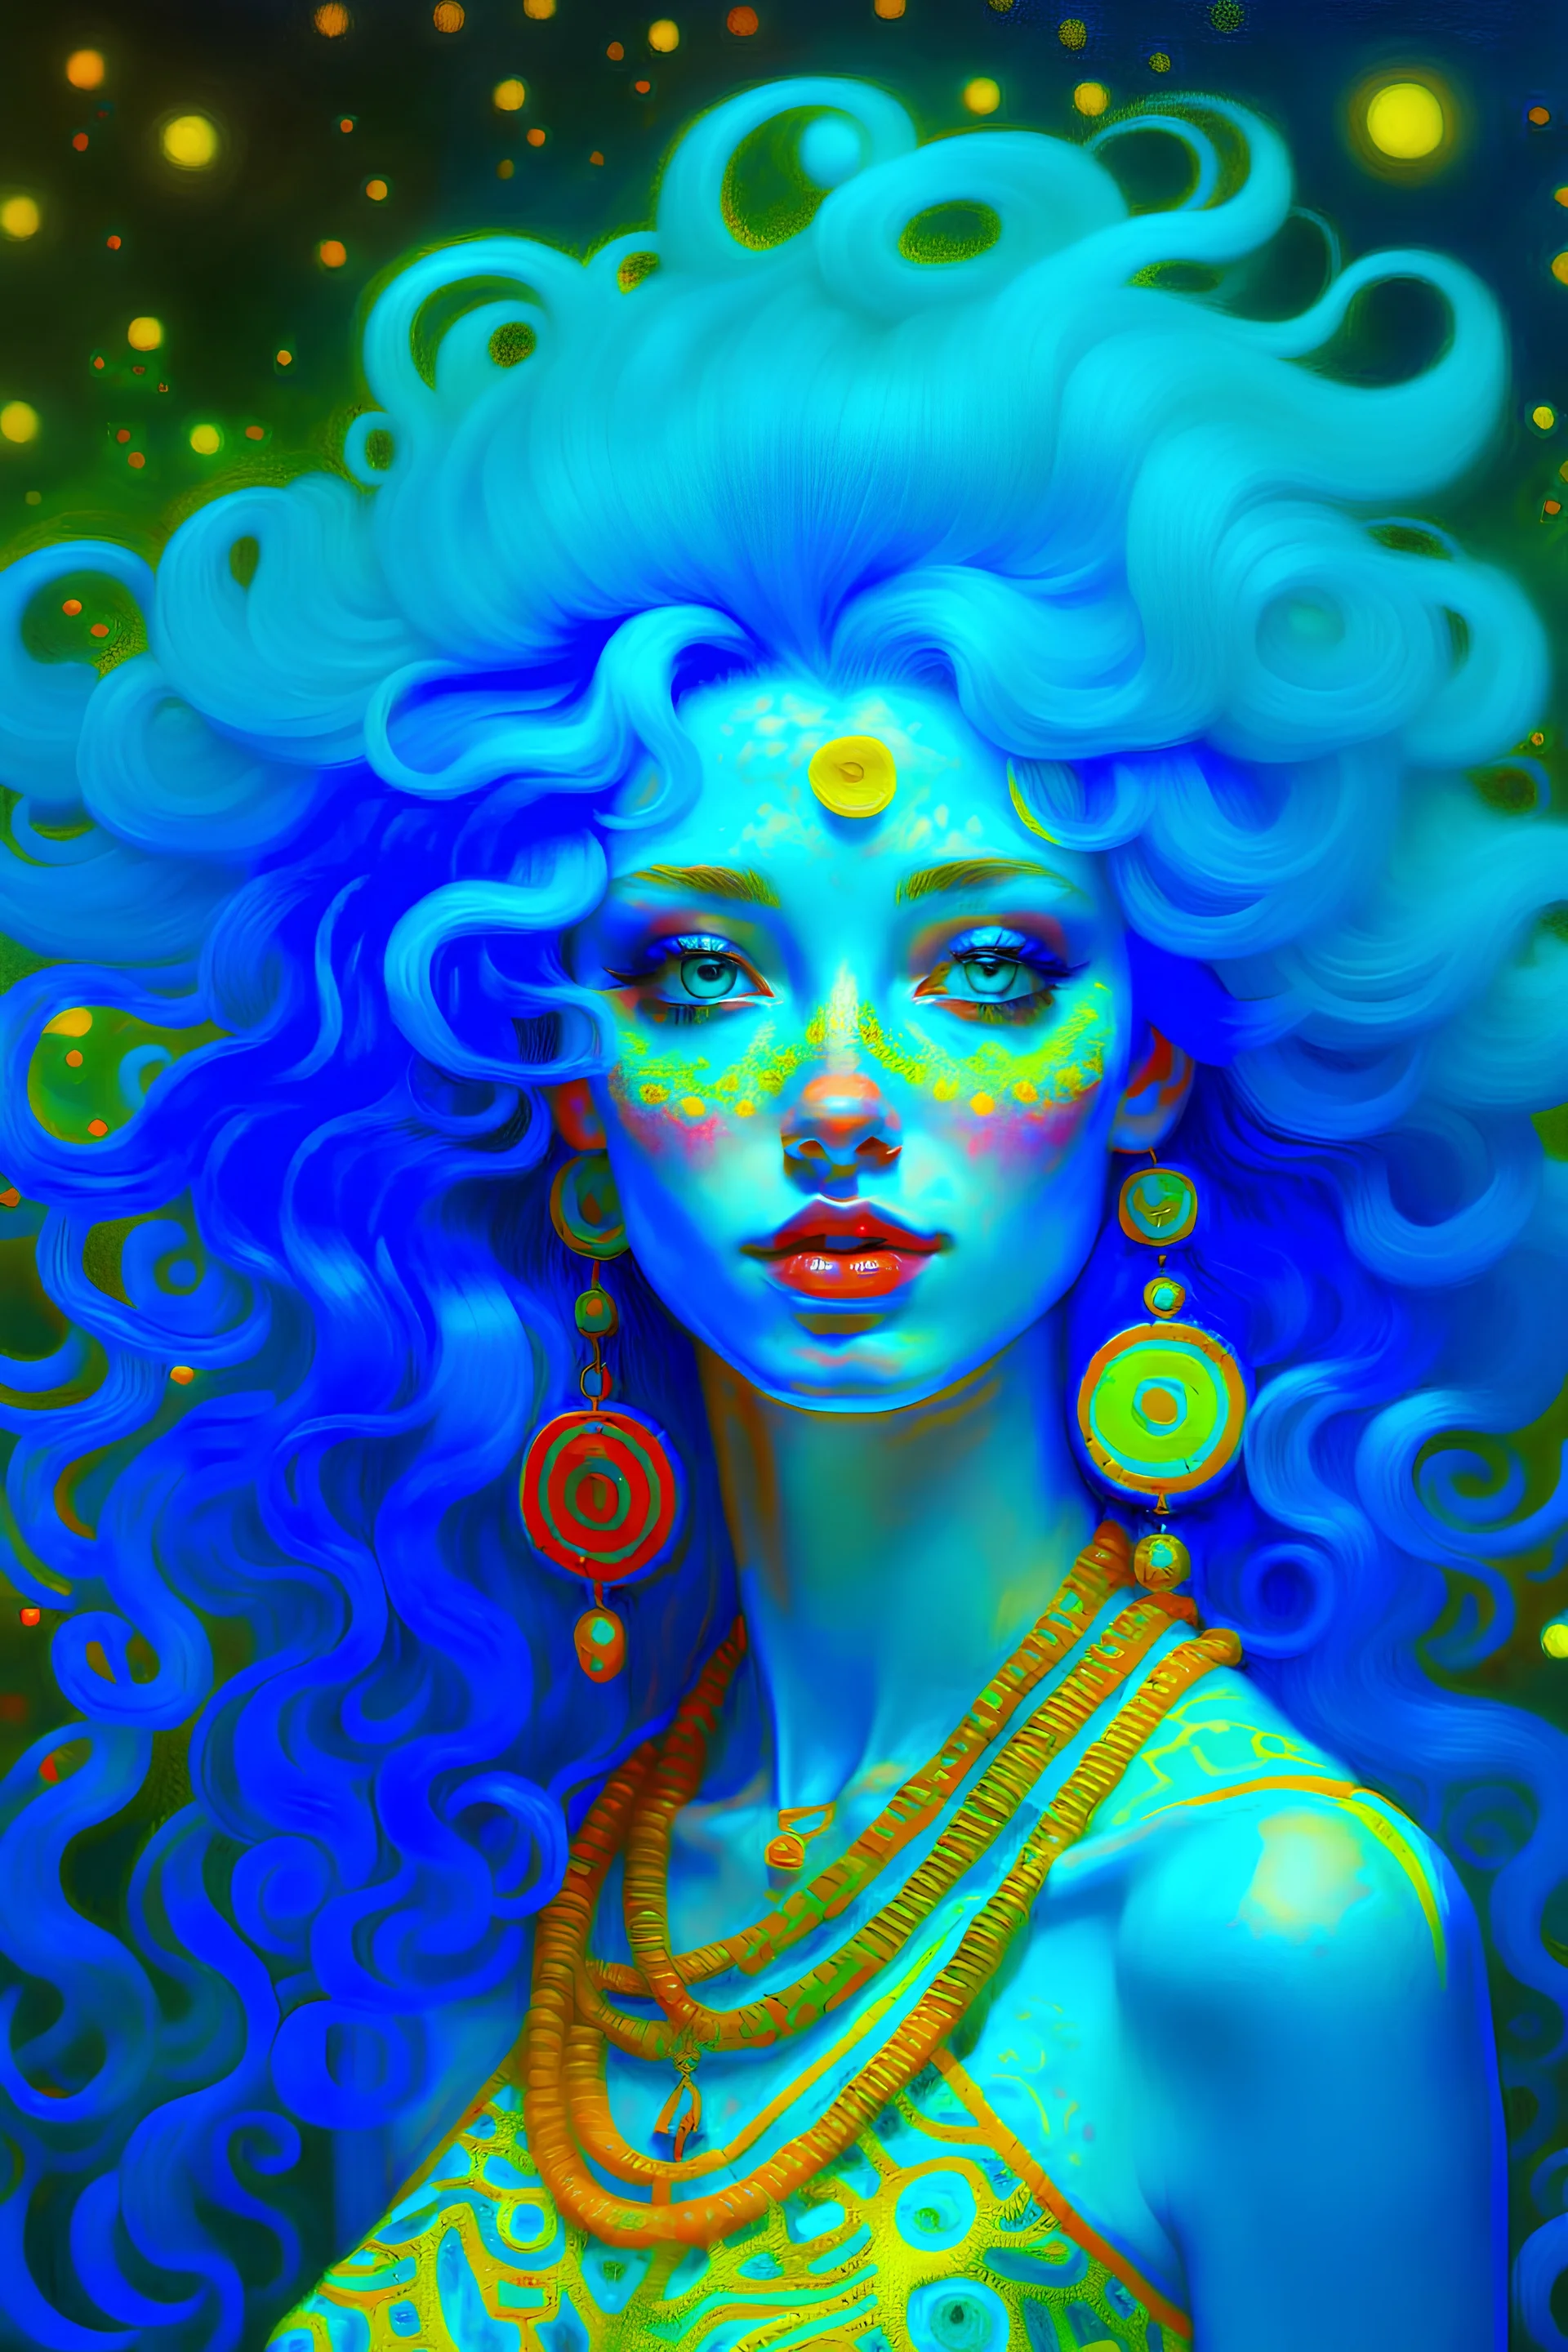 turquoise hair and infinite eyes, arrived using an internal astrolabe navigation from another dimension, she can control your mind with otherwoldly hypnotic beauty, psychadelic and uncommon colorful masterpiece by diego fernandez and Lou LL and klimt trending on